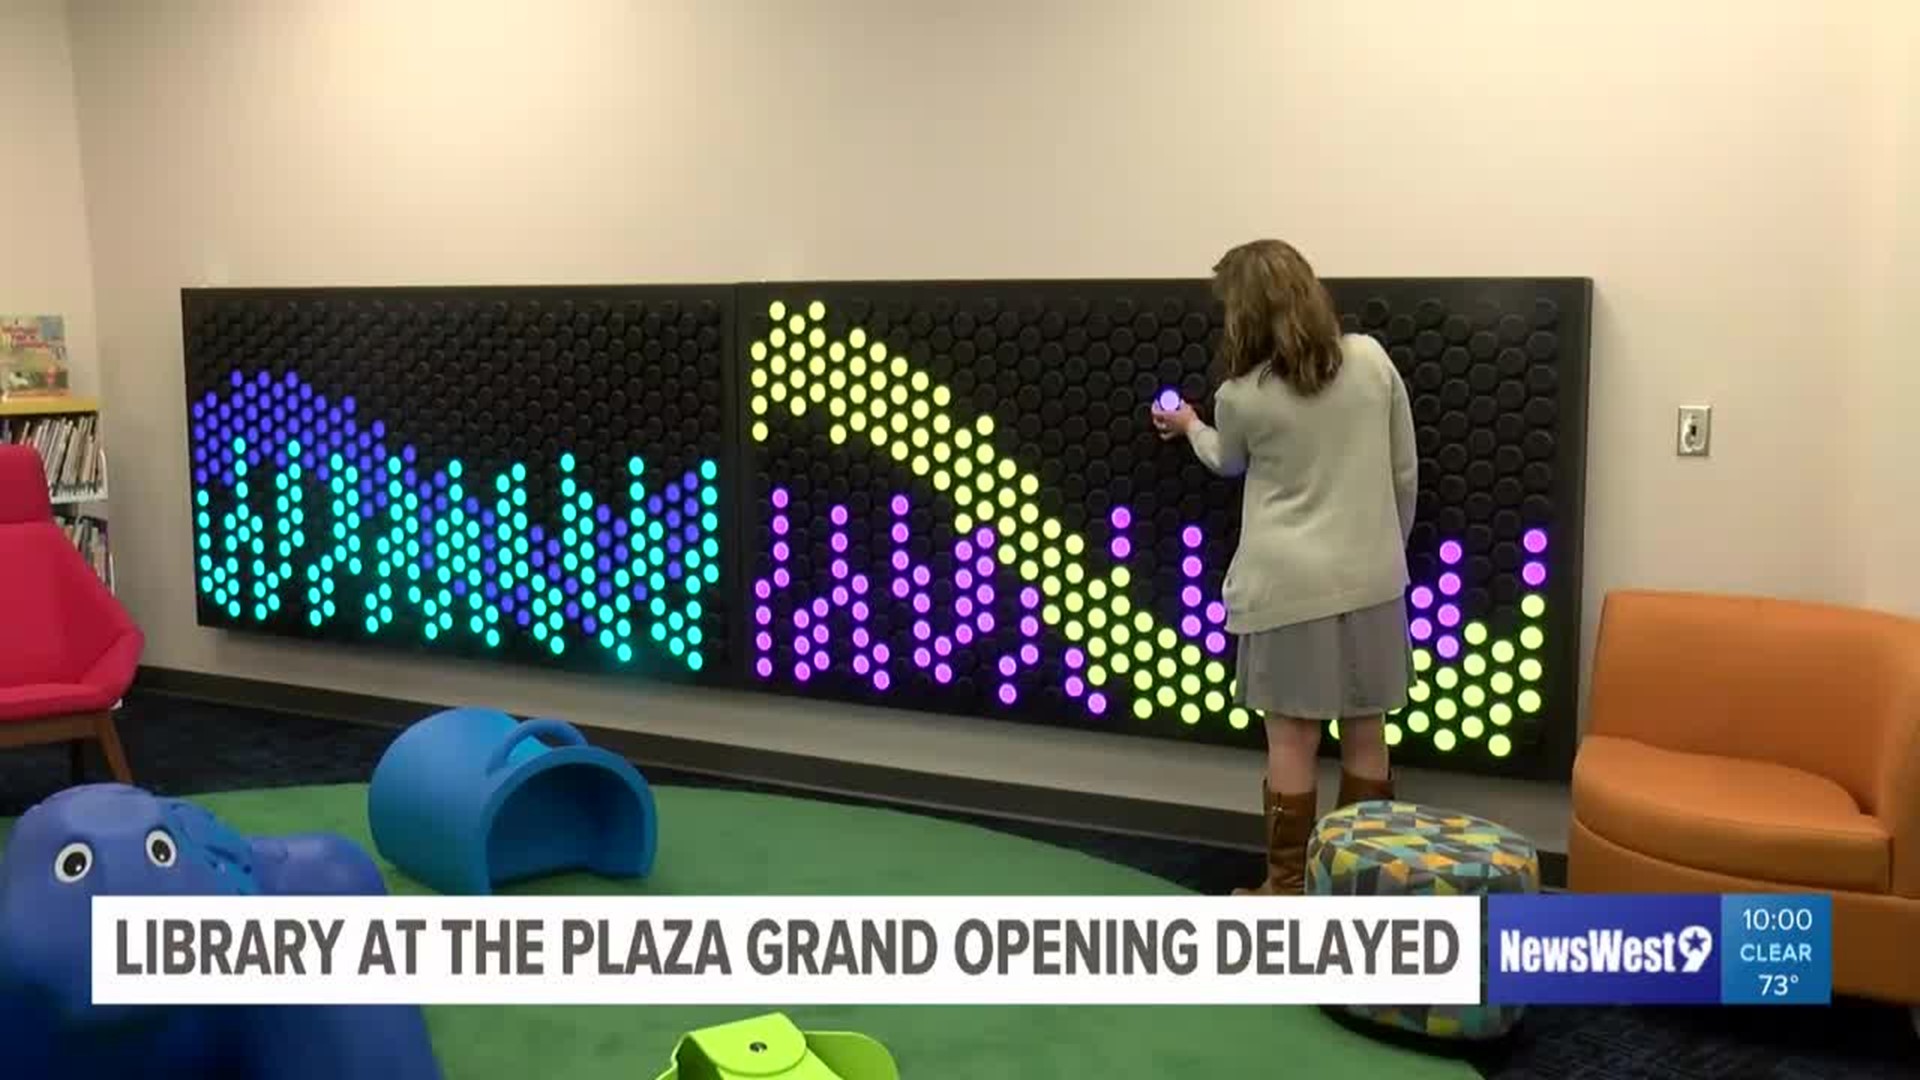 Midland’s Library at the Plaza awaits grand opening